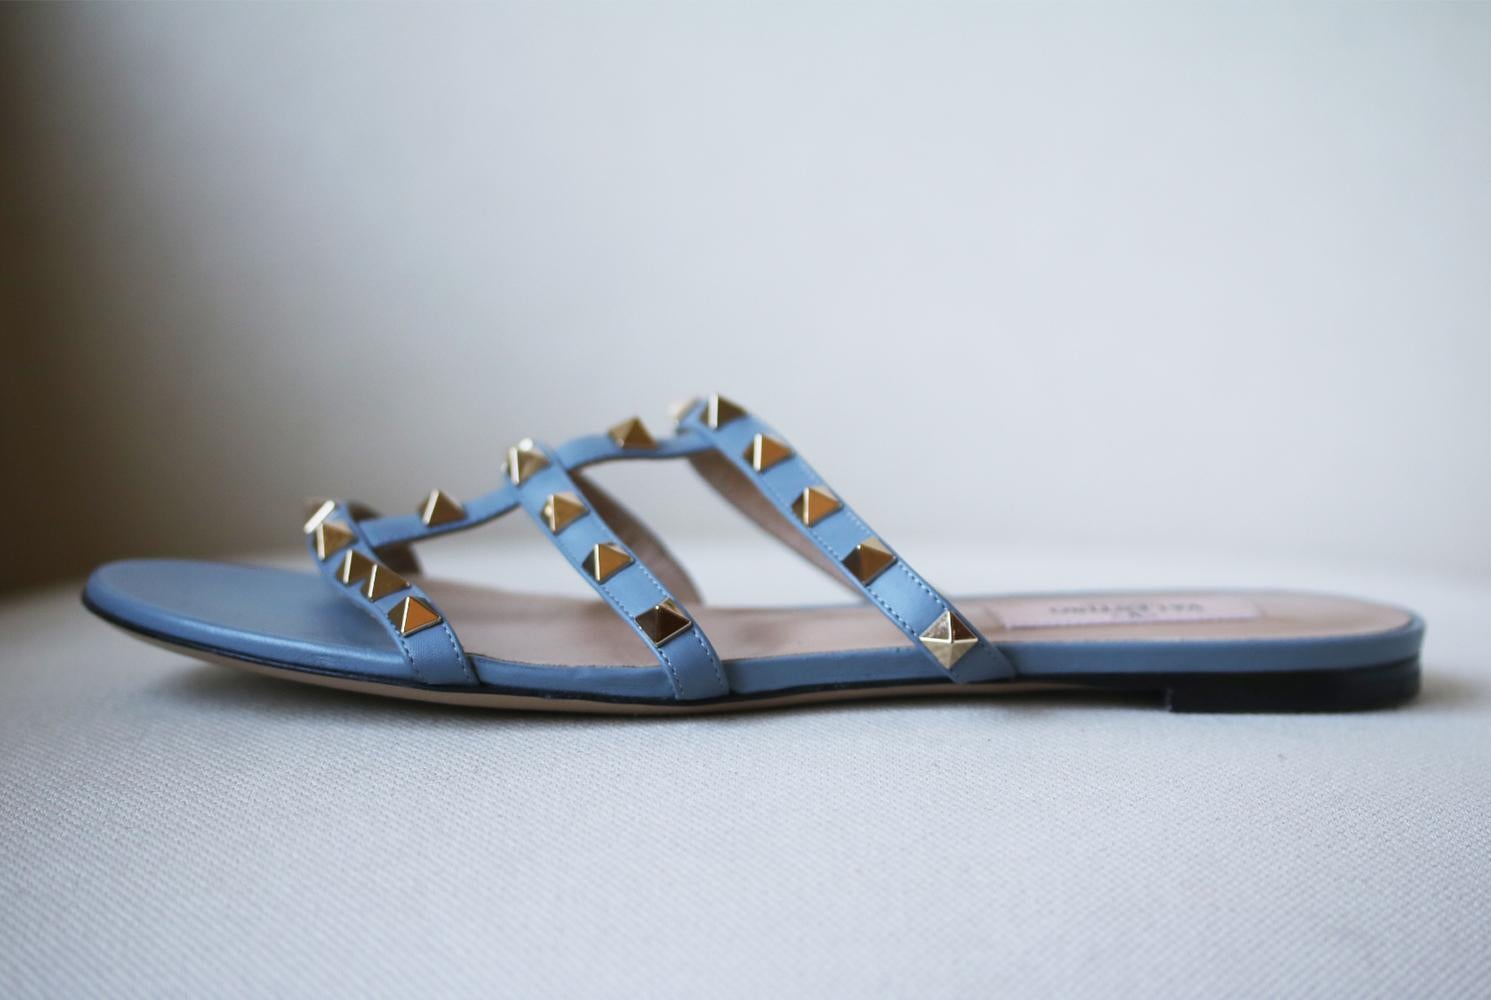 A perfect choice for day or evening, these sandals have been crafted in Italy from light-blue leather and feature thin, caged straps that beautifully frame the feet. Heel measures approximately 10mm/ 0.5 inches. Light-blue leather (Calf). Slip on.